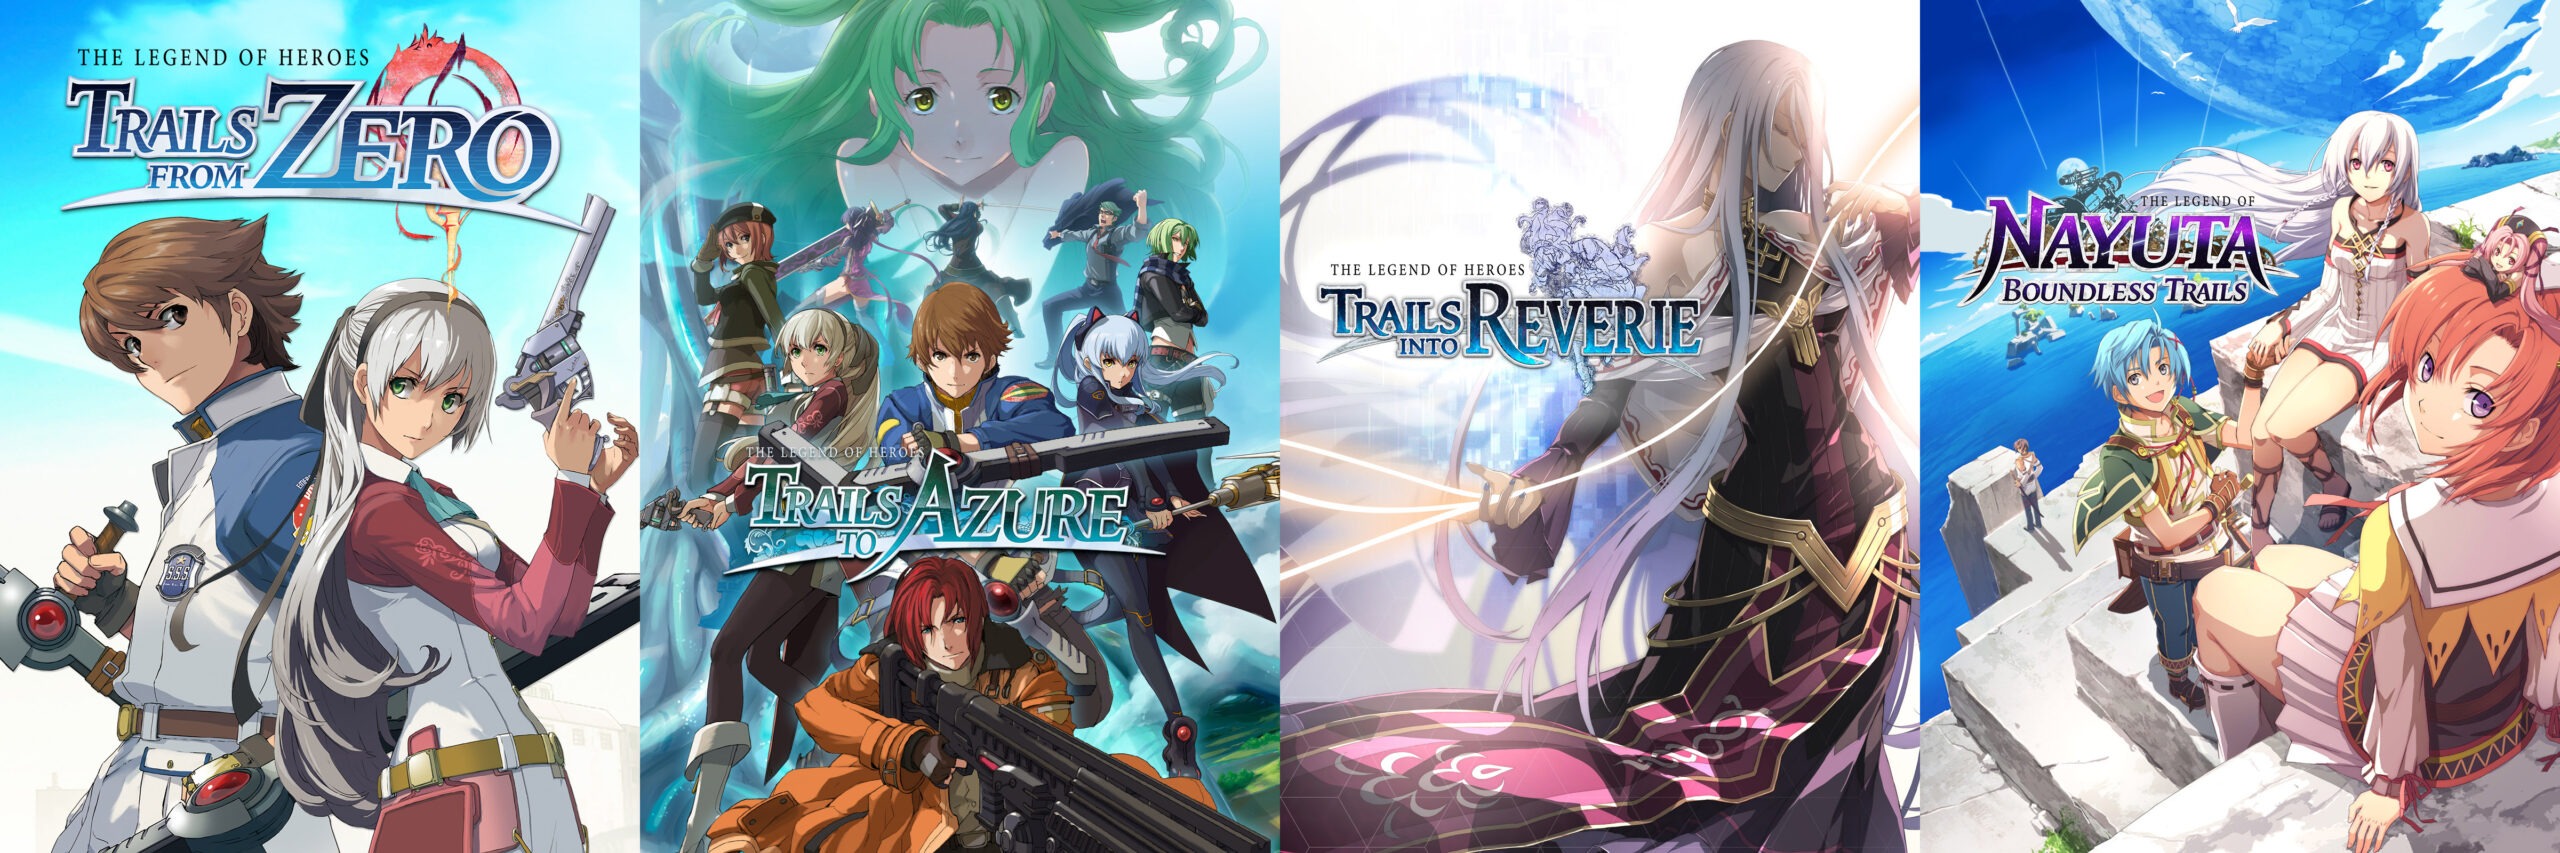 Trails serie